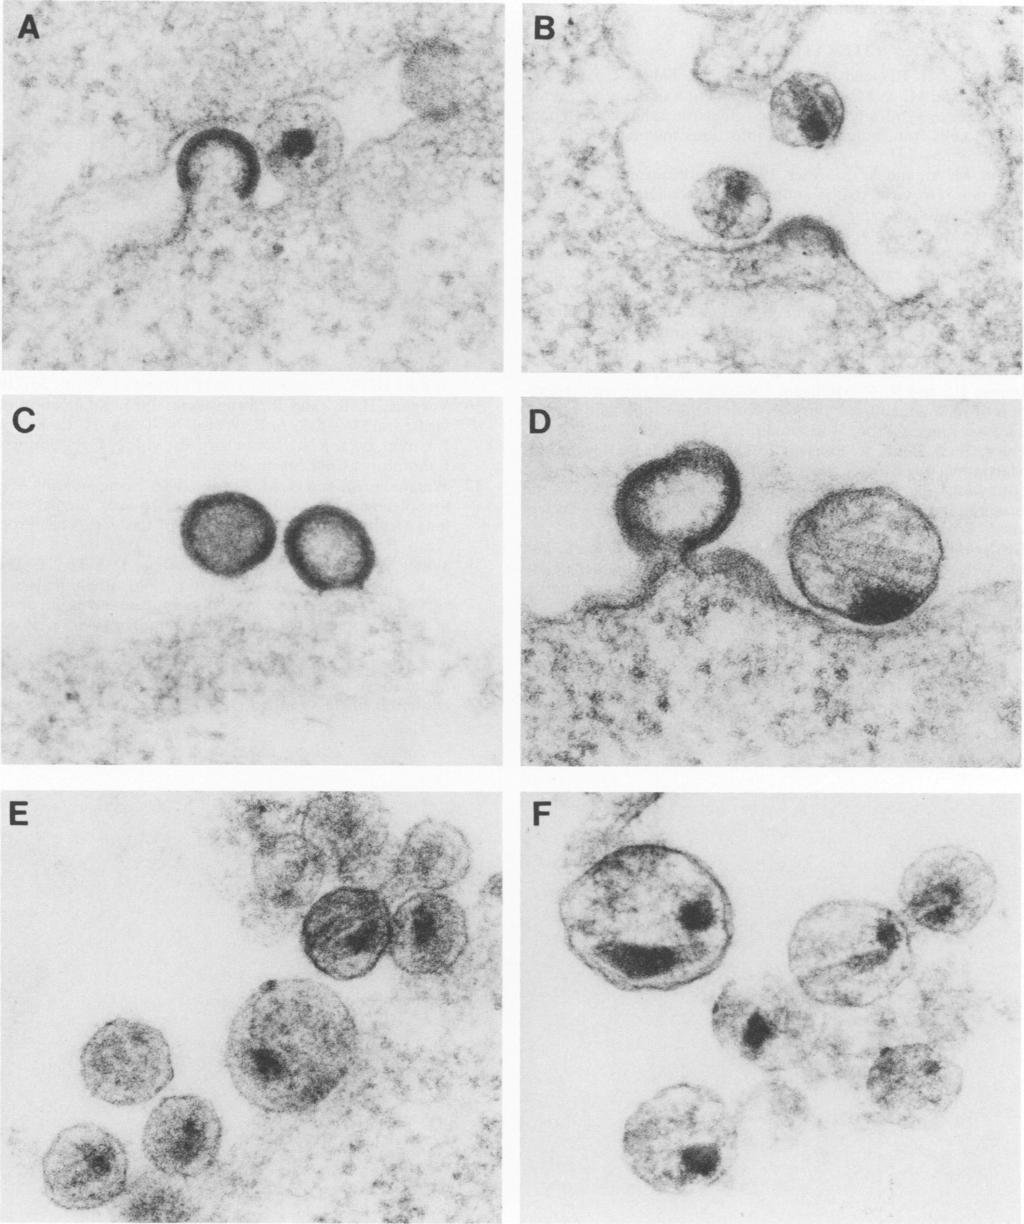 VOL. 64, 1990 NOTES 5233 A B;'..-.....A ;r"la "A..4.. I C D E F :7 I. I A.i FIG. 5. Electron micrographs of wild-type and mutant viral particles. (A and B) Infection with wild-type virus.